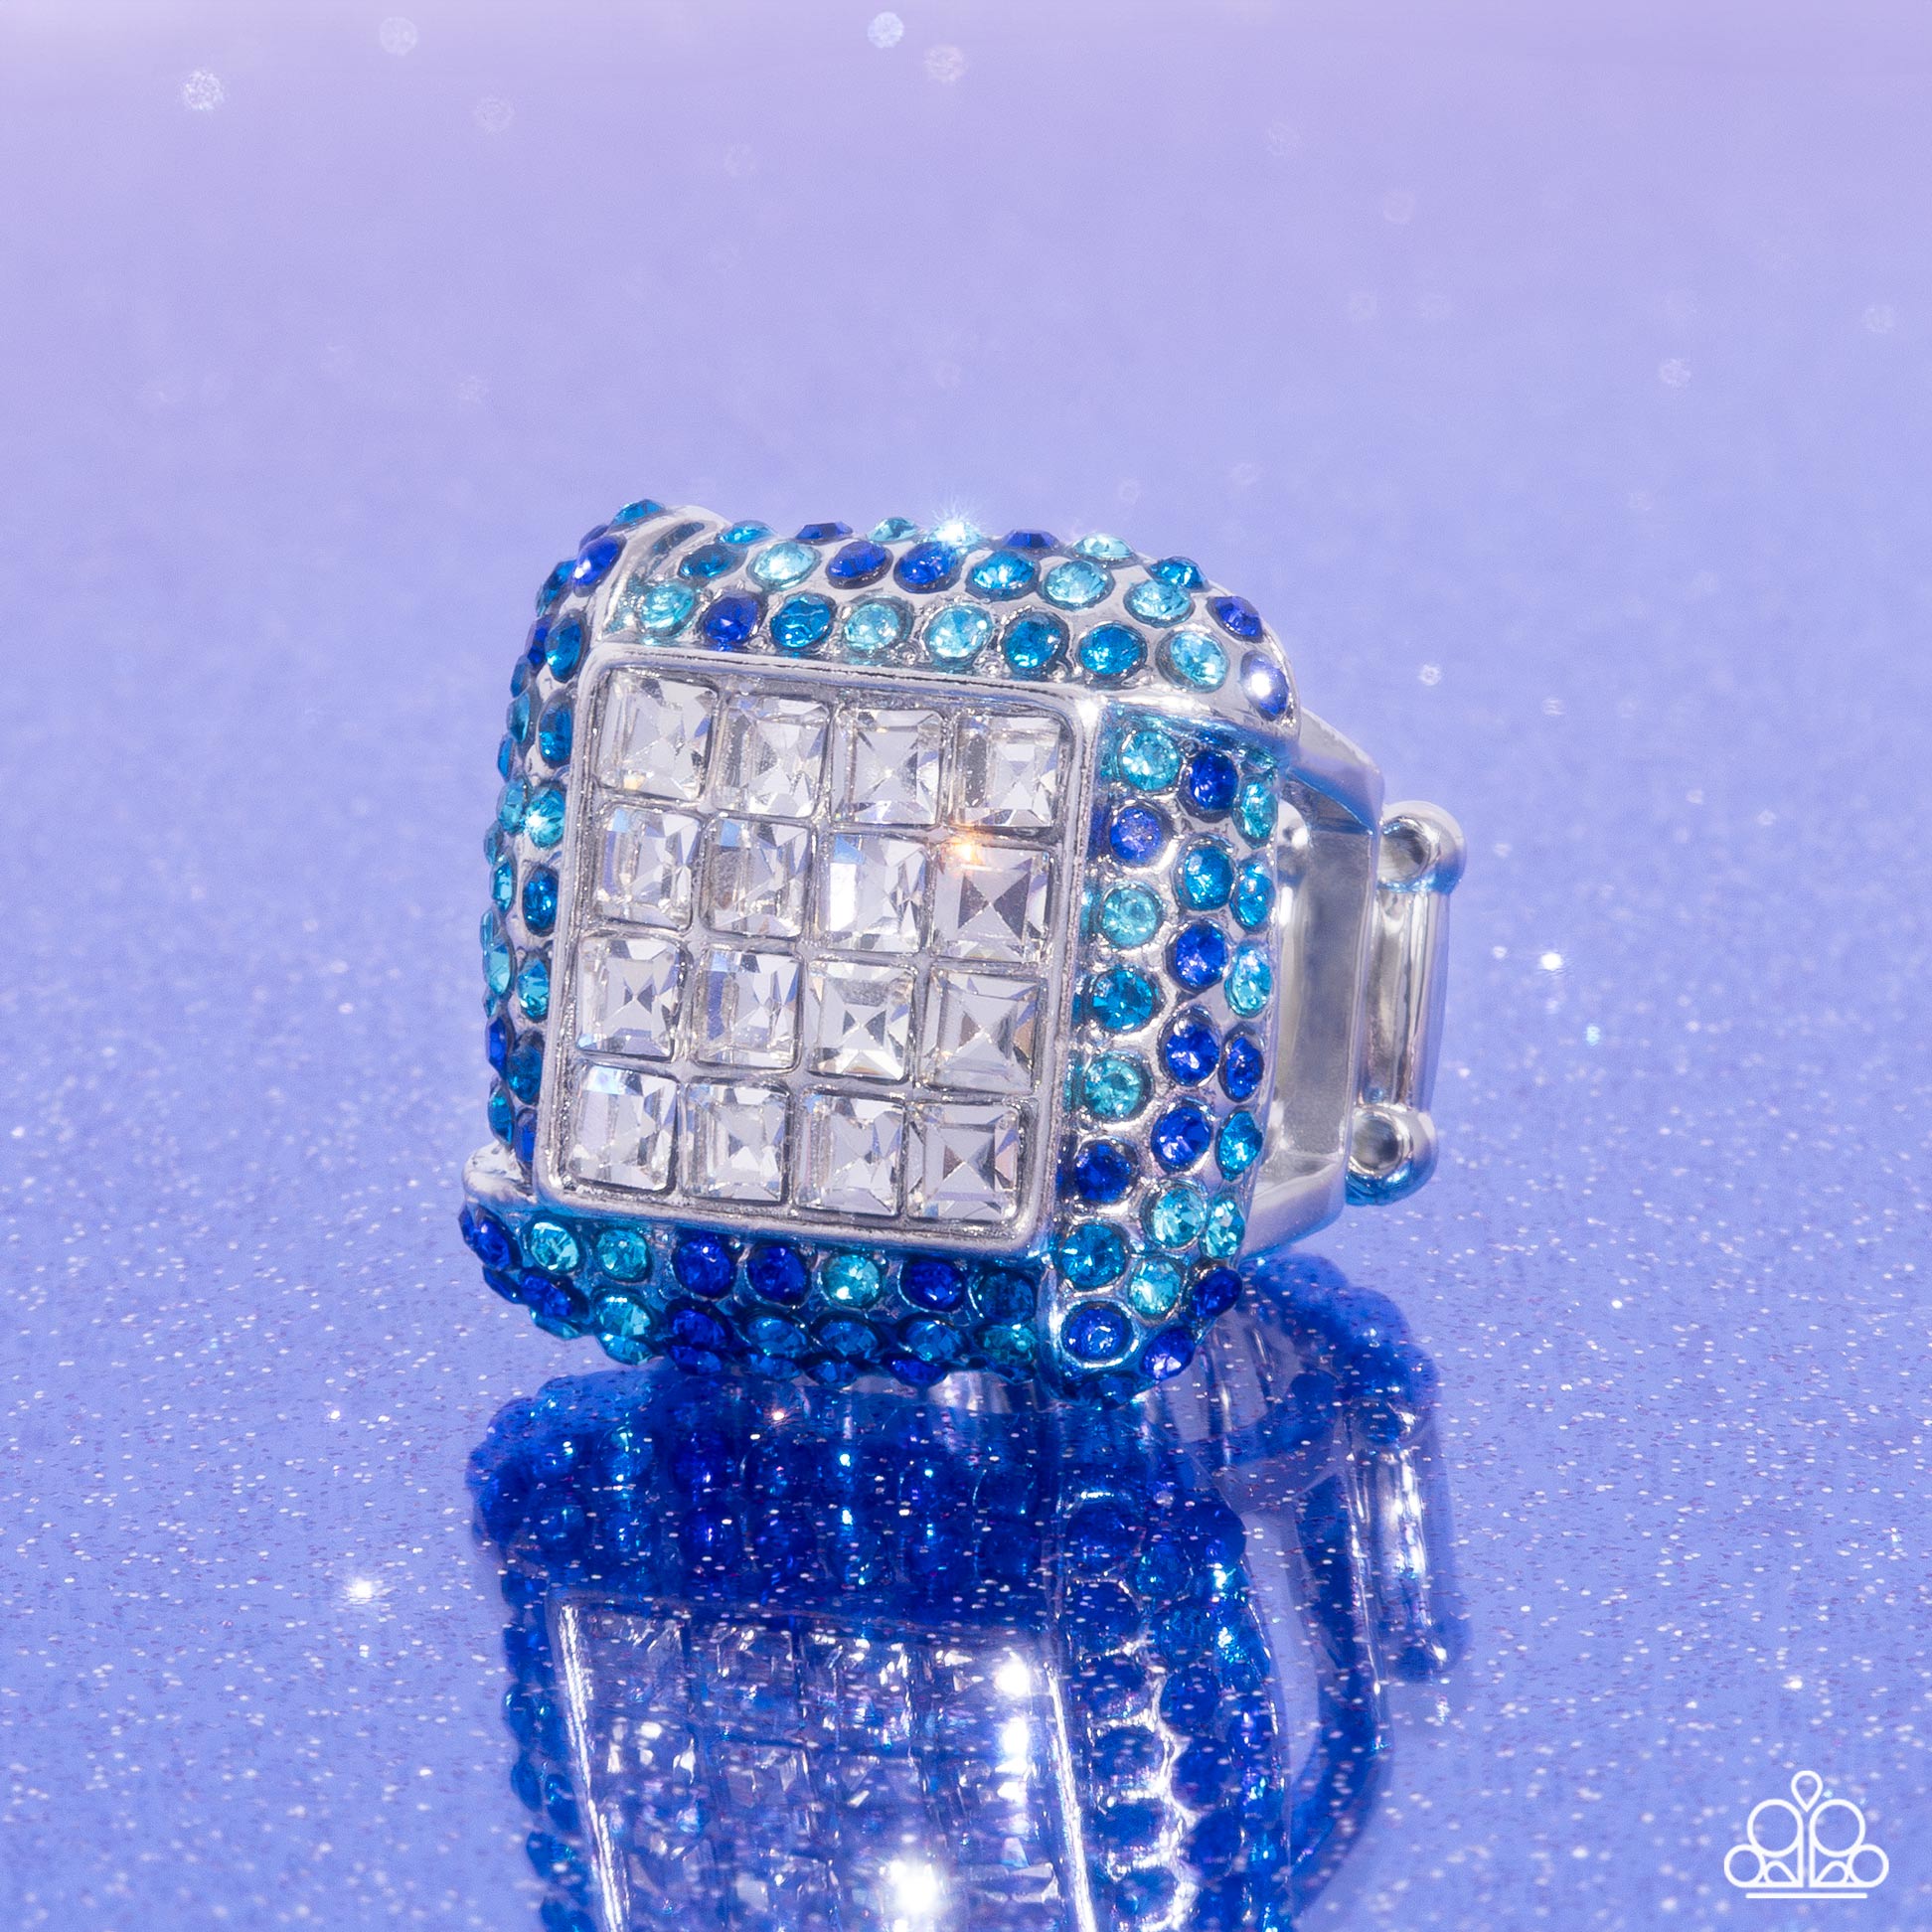 <p>Featuring a collection of faceted white square-cut gems, a thick silver frame embellished with blue multicolored rhinestones glistens atop the finger for a standout, sparkly centerpiece. Features a stretchy band for a flexible fit.</p> <p><i> Sold as one individual ring.</i></p>